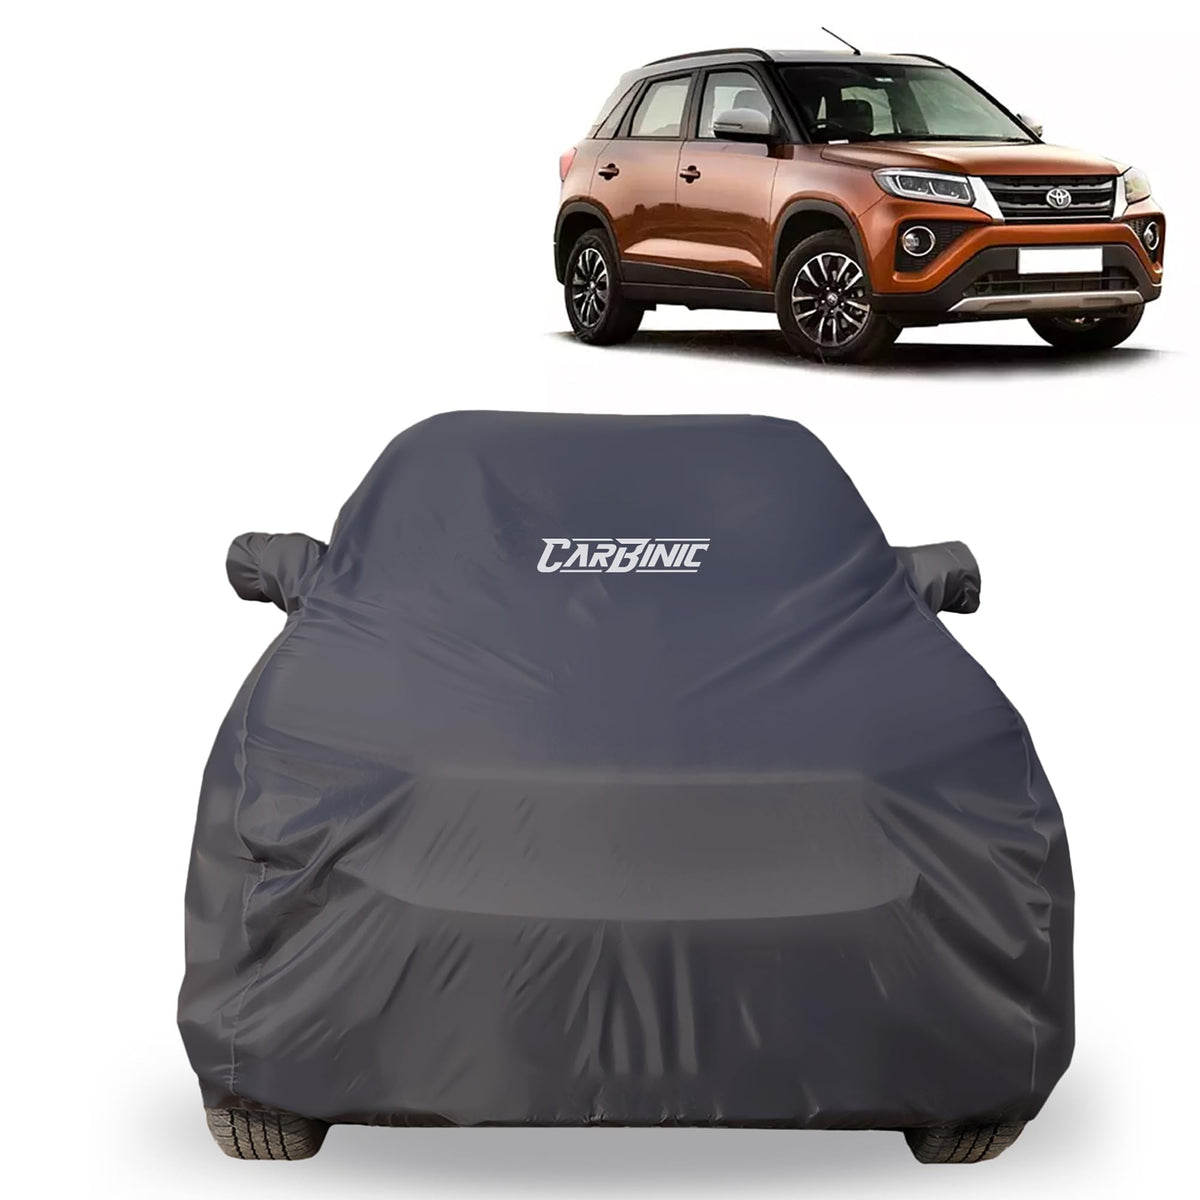 CARBINIC Car Body Cover for KIA Sonet 2020 | Water Resistant, UV Protection Car Cover | Scratchproof Body Shield | All-Weather Cover | Mirror Pocket & Antenna | Car Accessories Dusk Grey